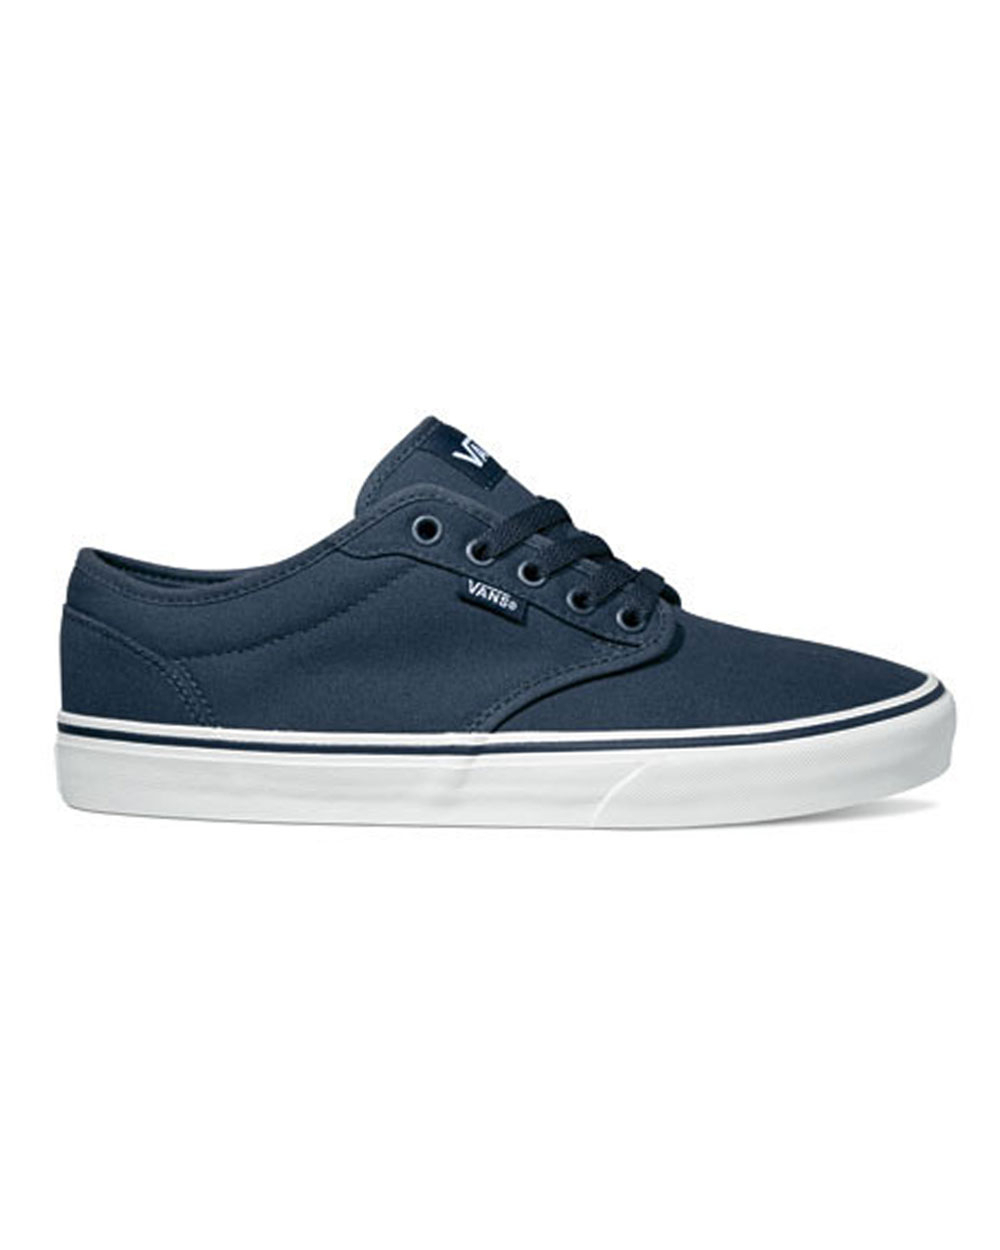 Vans Atwood Canvas (navy/white)